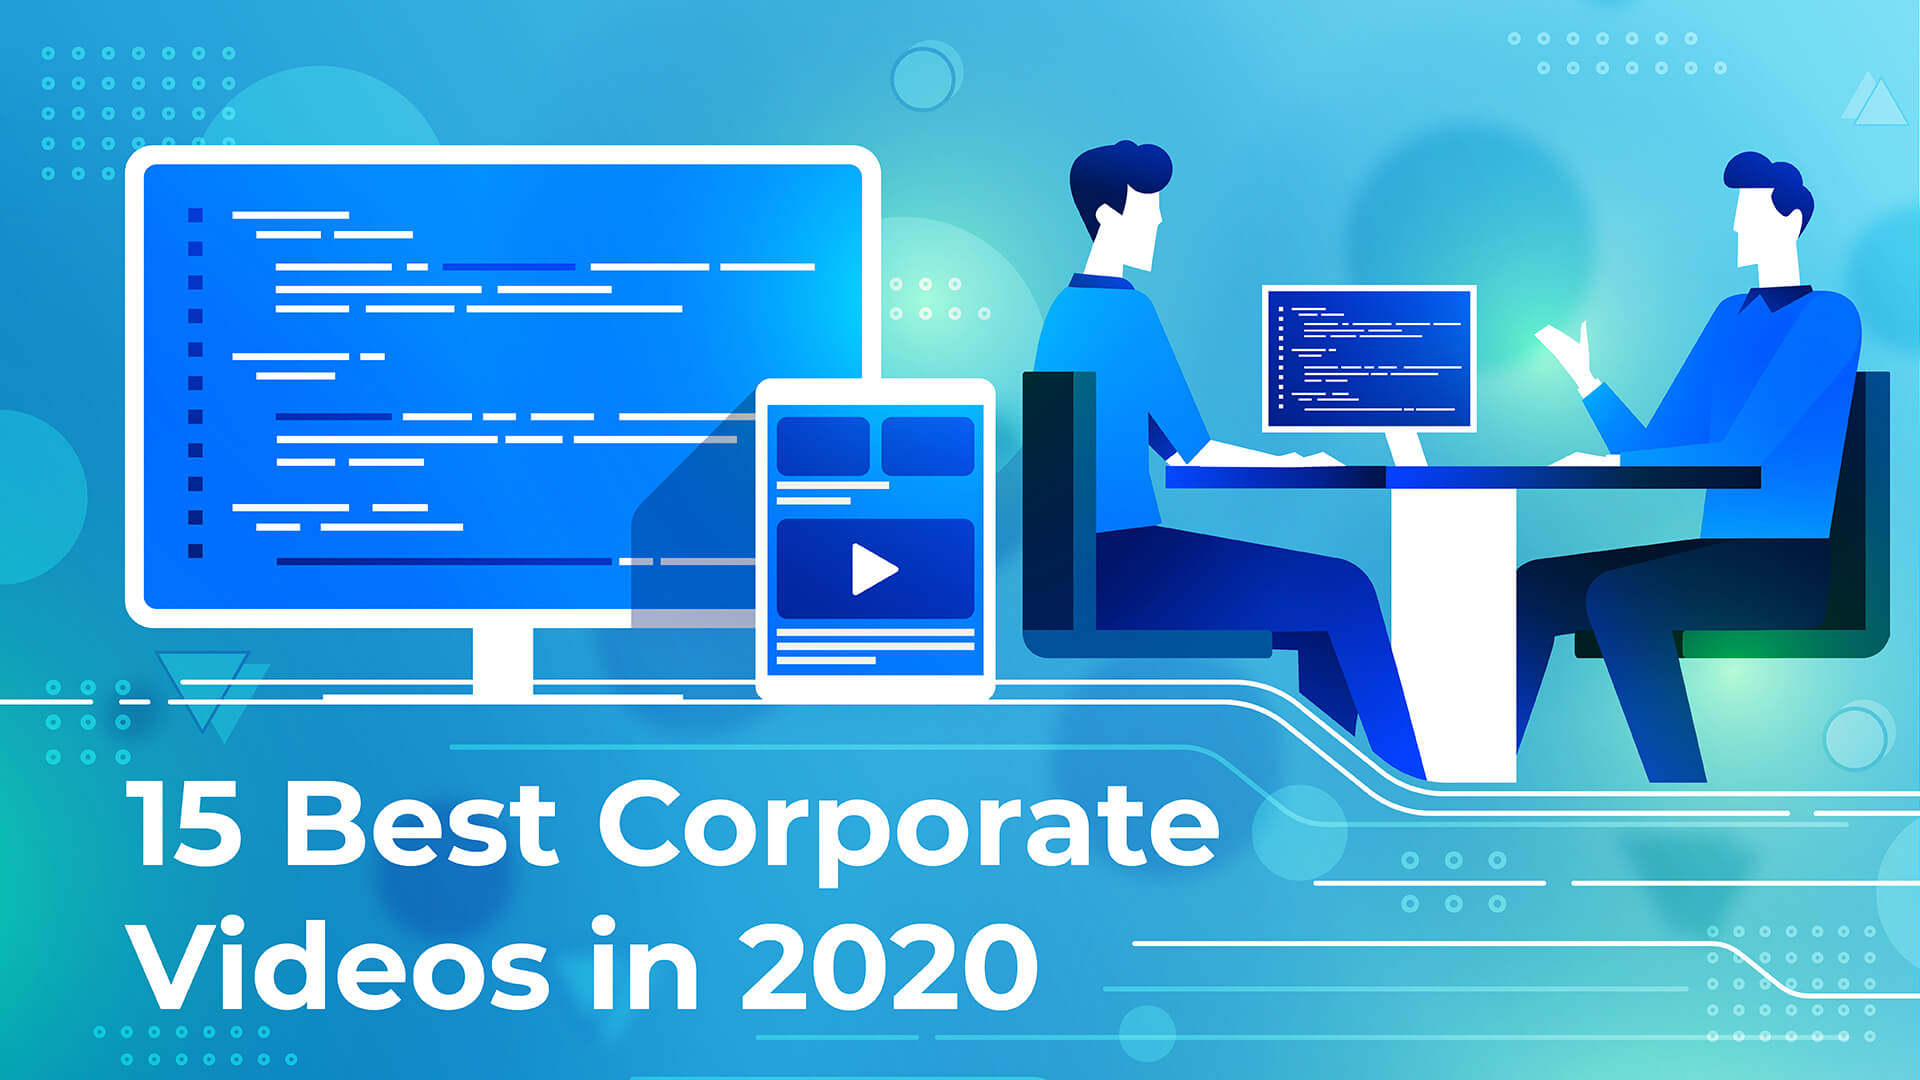 15 Extraordinary Corporate Videos You Must Watch In 2020